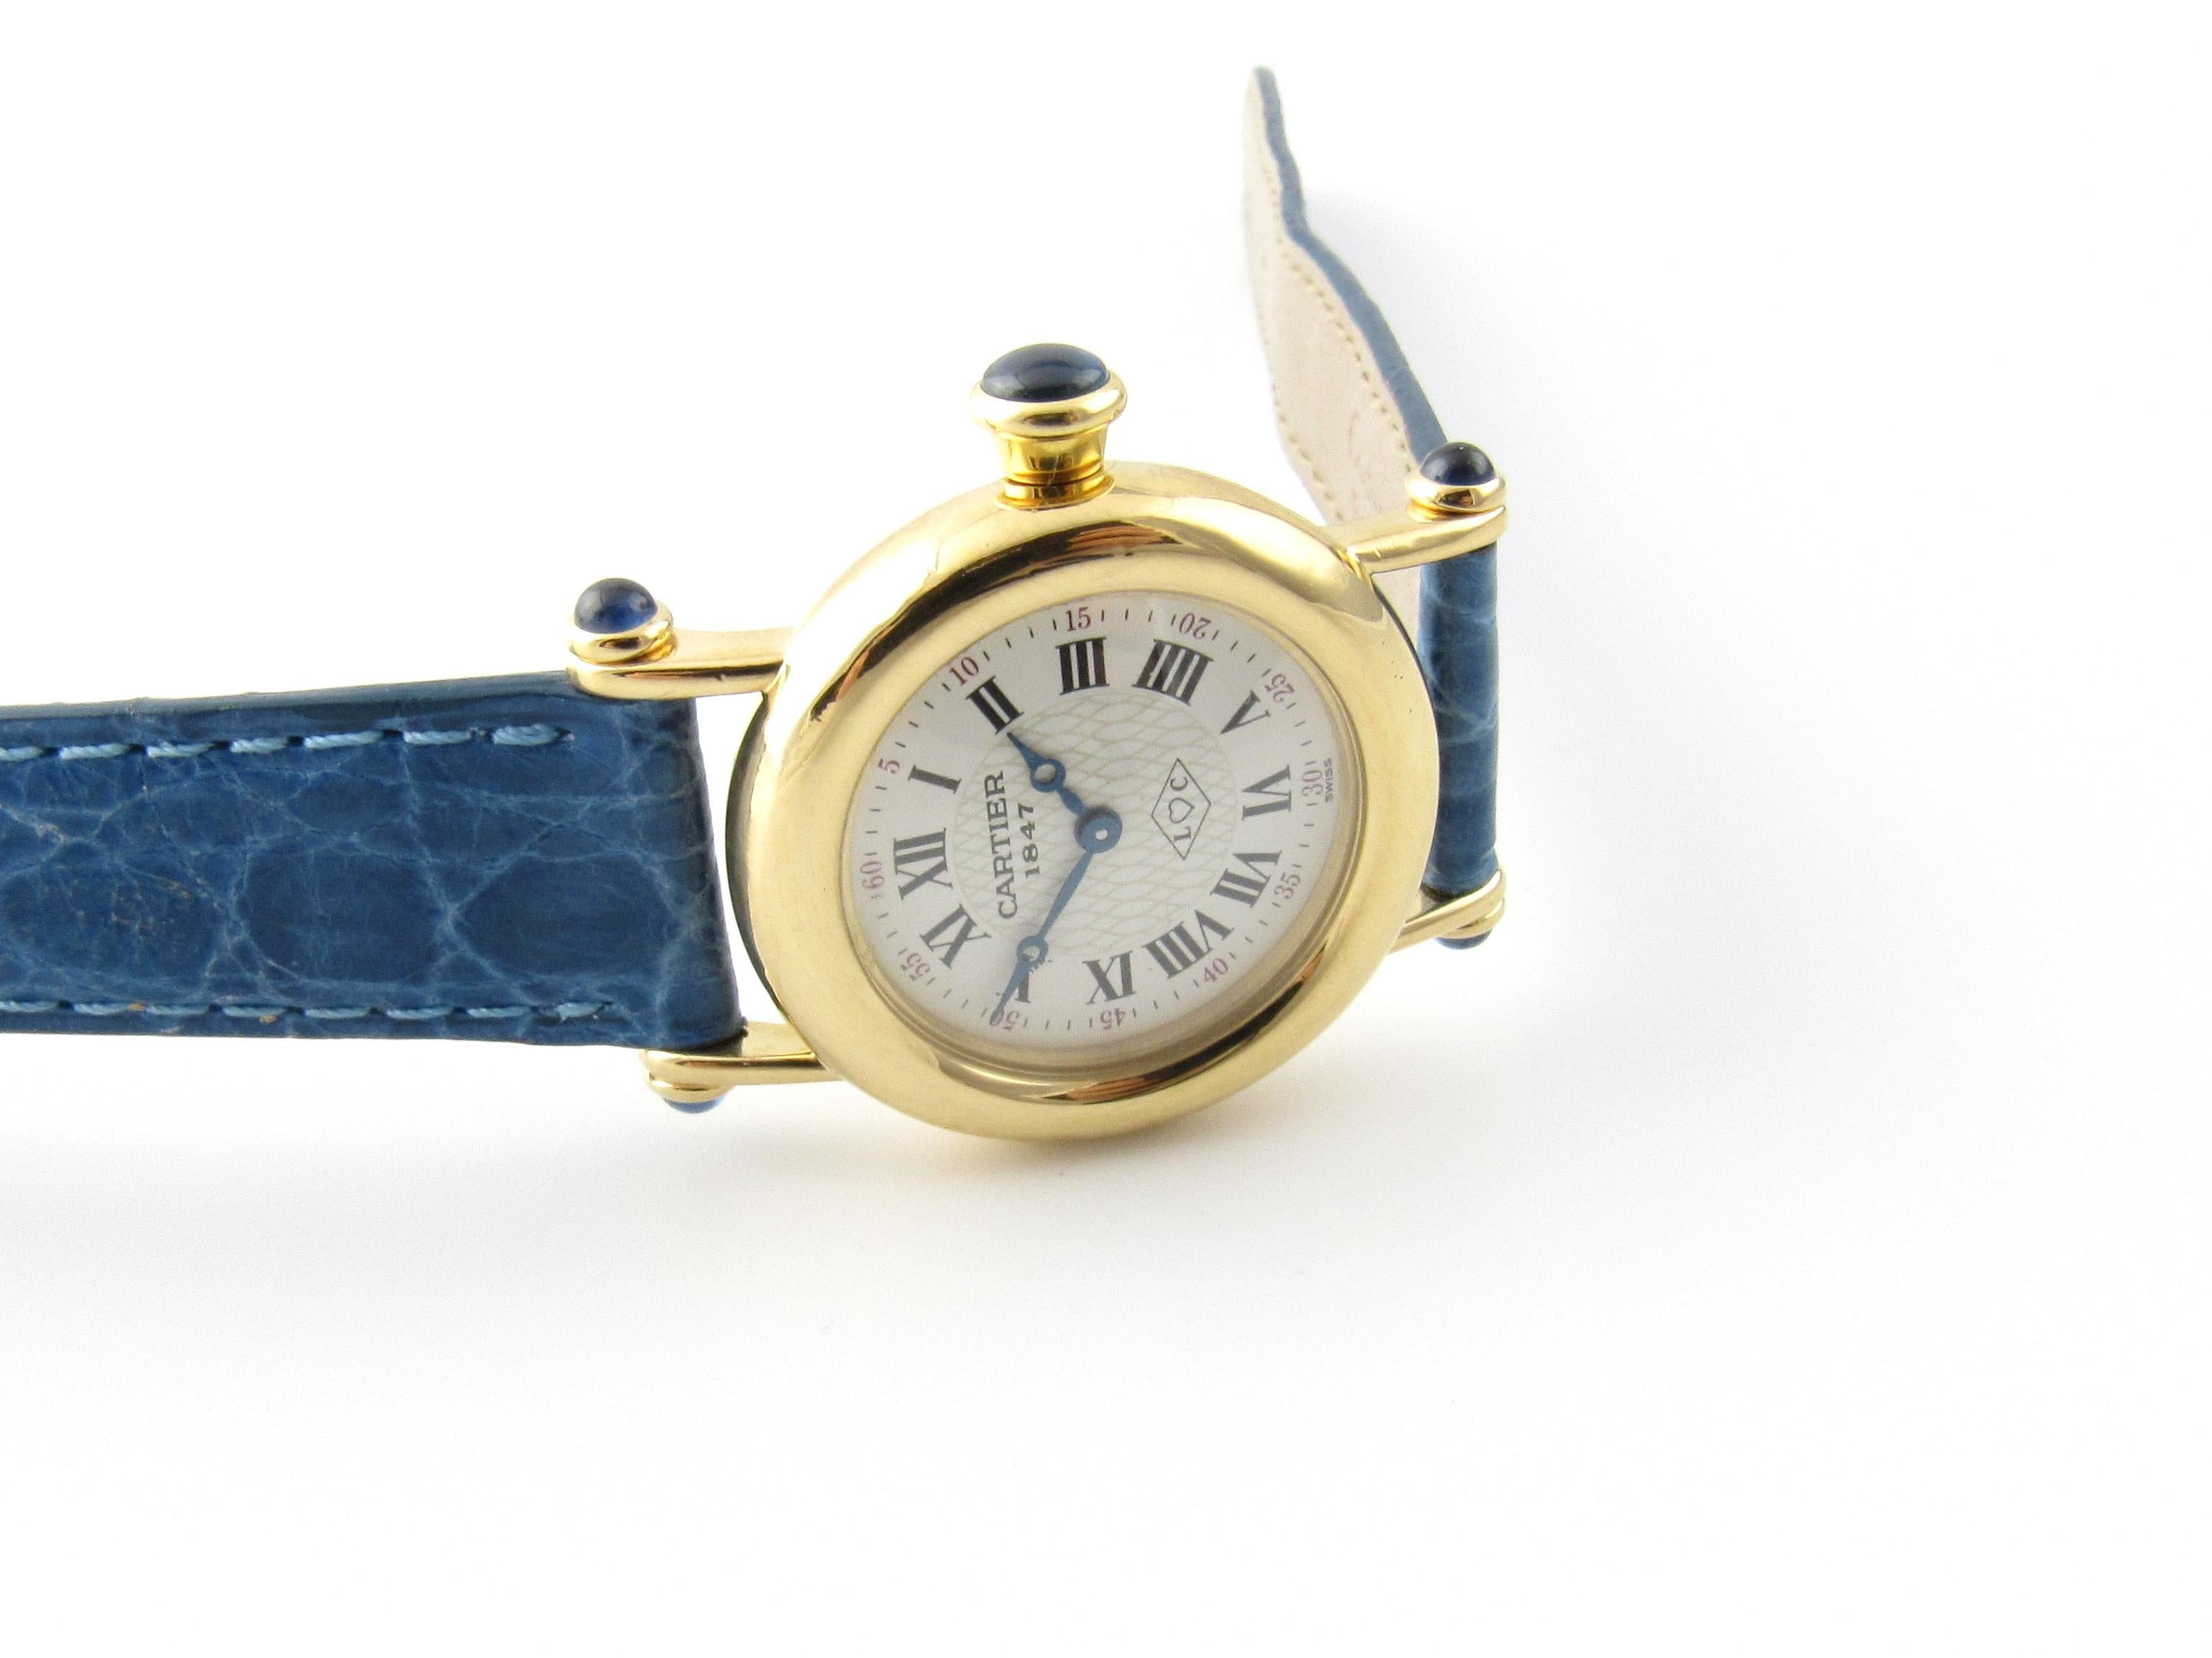 Cartier Diabolo Ladies Watch

This authentic Cartier watch is the 150th Anniversary Edition made in 1997 celebrating the 150th year of Cartier

The dial has the start year of 1847 plus L C for  Luis Cartier, the founder

The Case is 18K Yellow Gold